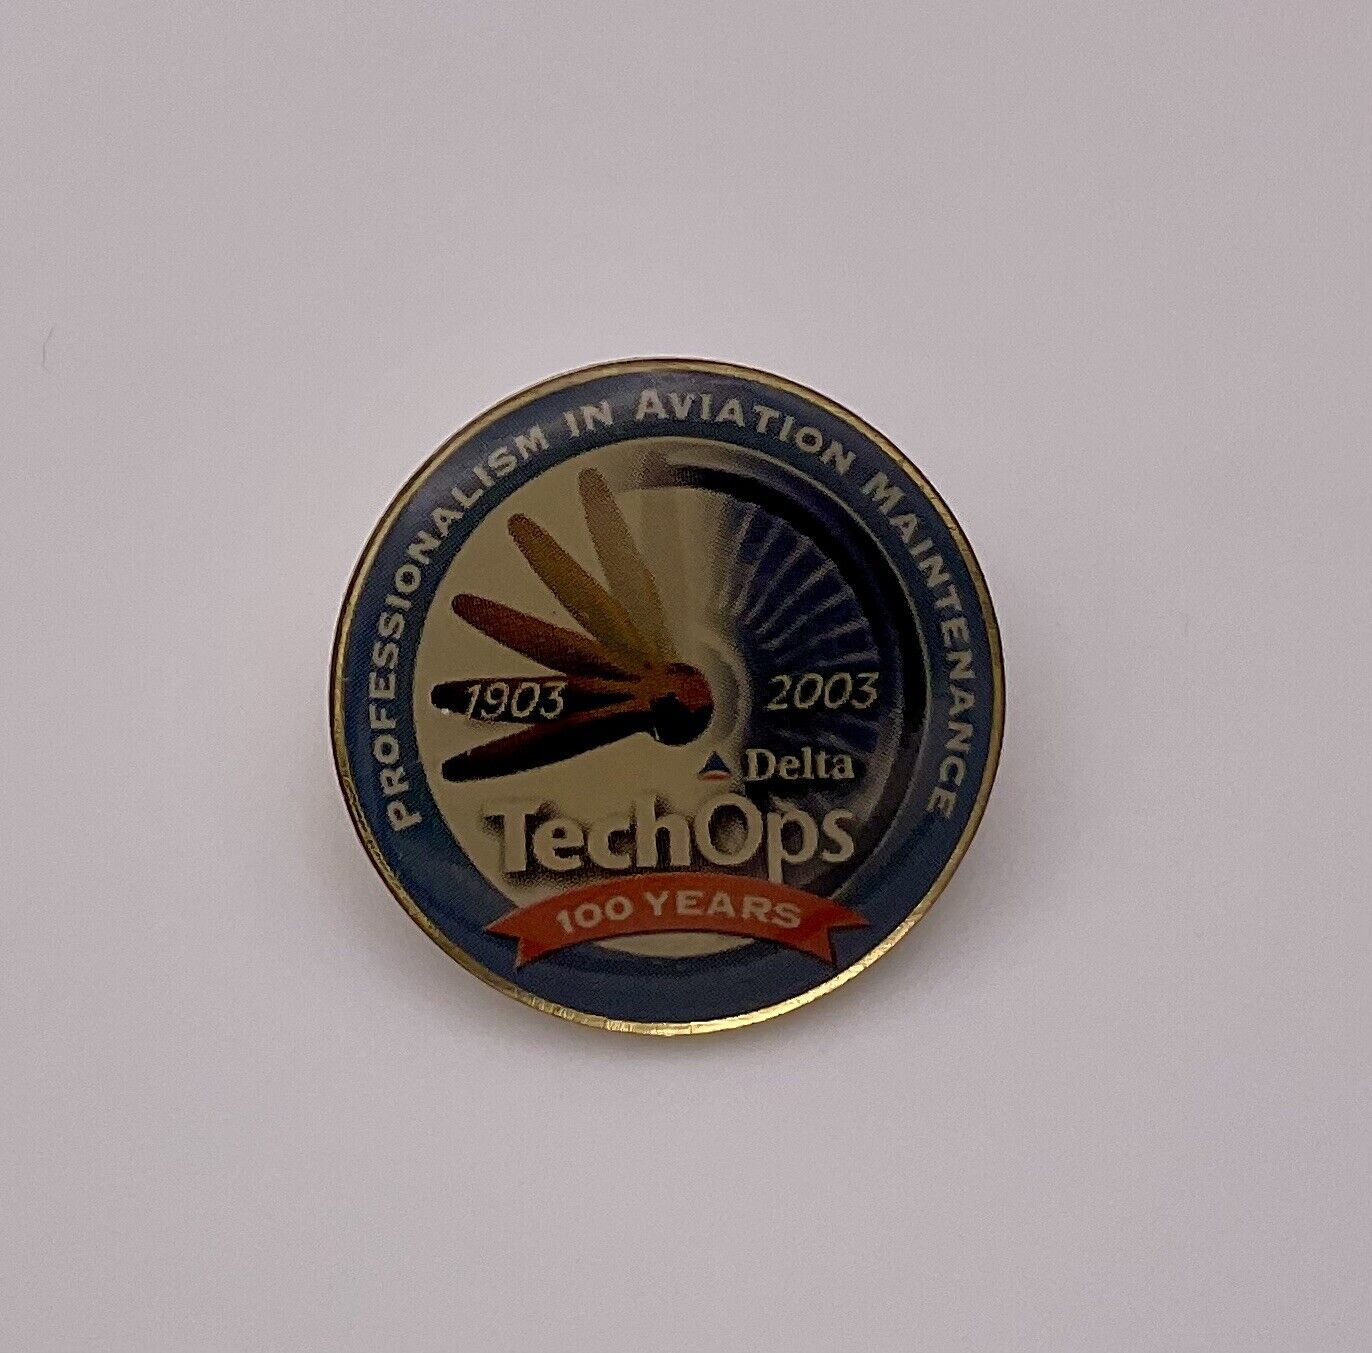 Delta Air Lines 2003 Tech Ops 100 Years Pin